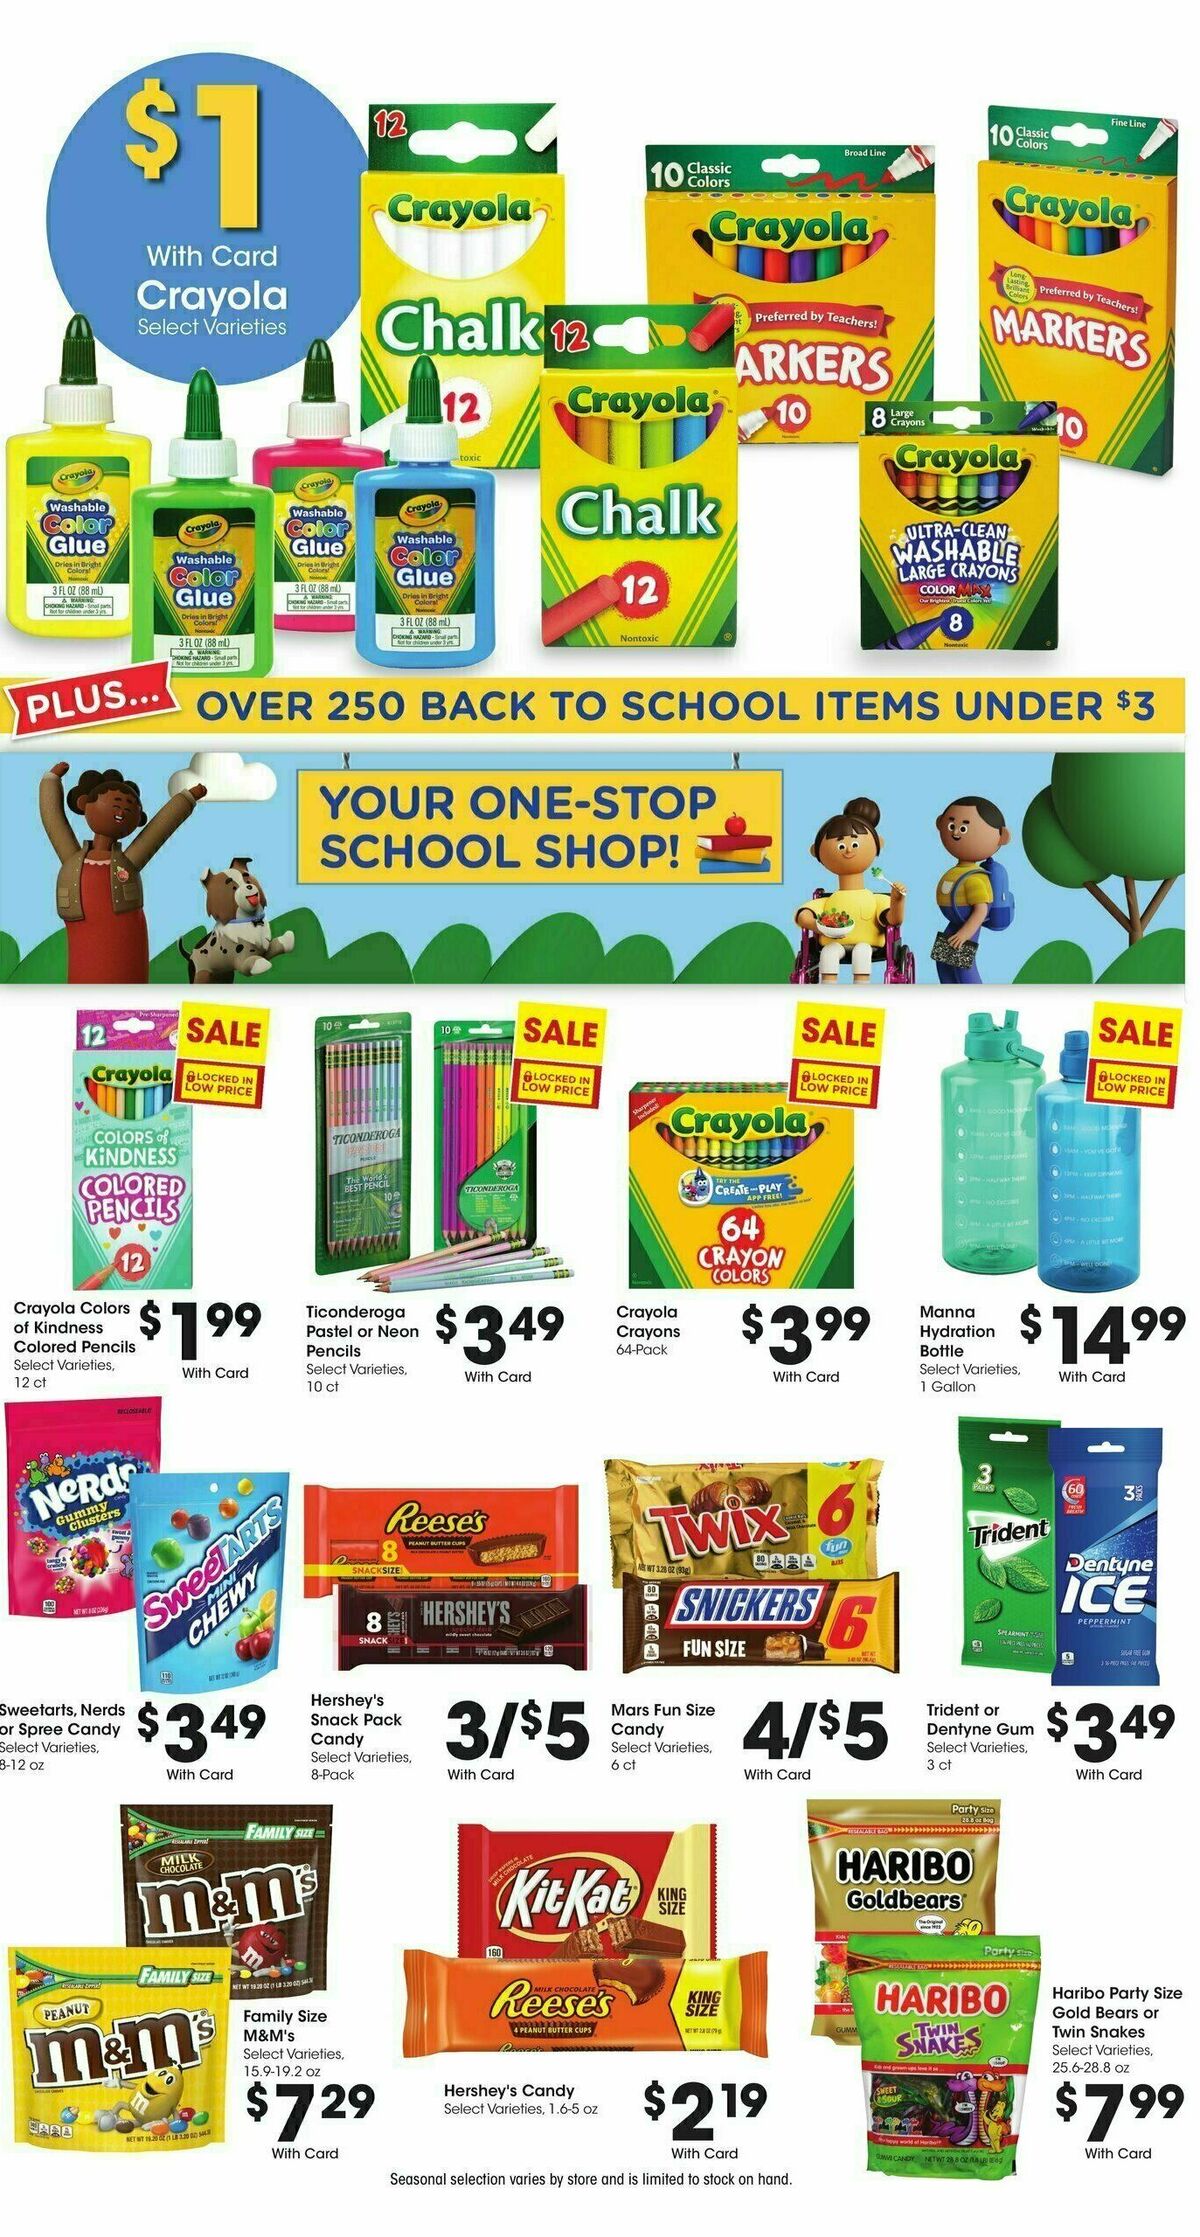 King Soopers Weekly Ad from July 26